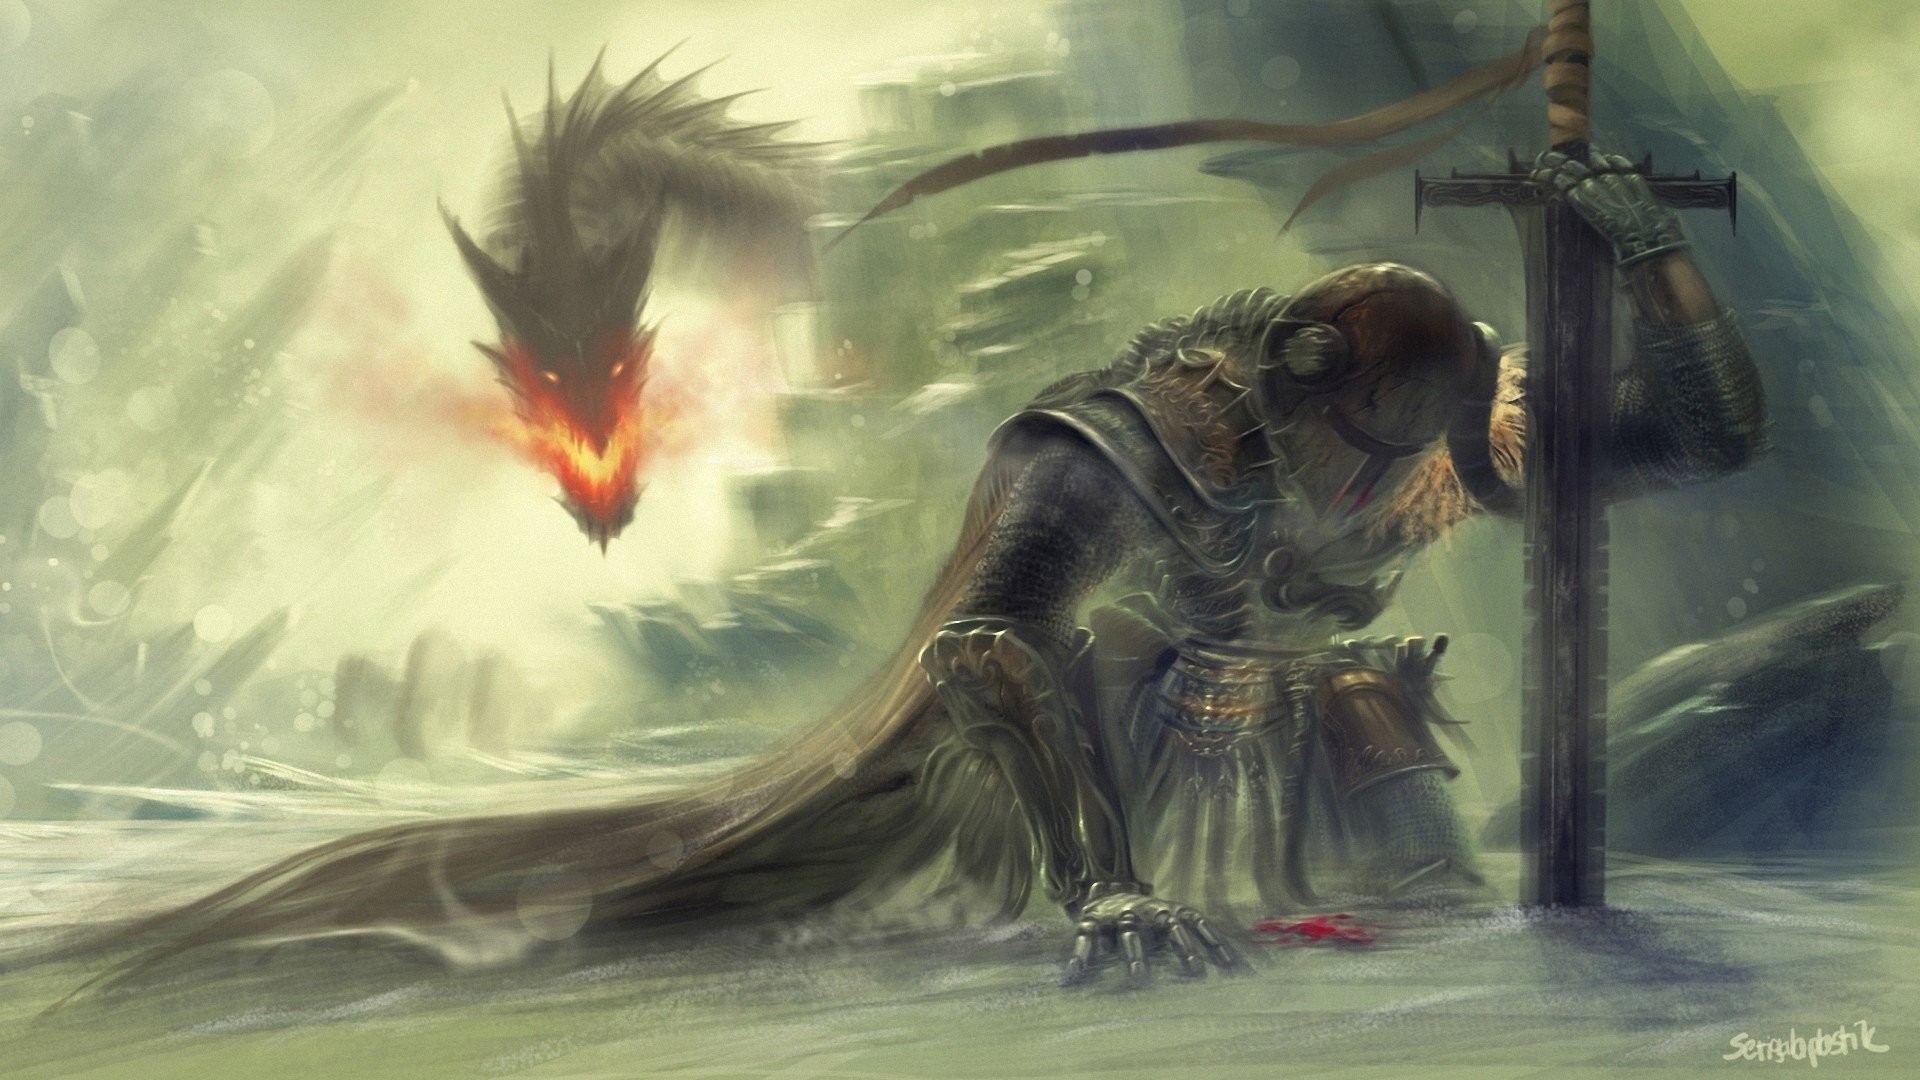 Wallpaper Warrior Defeated By Dragon 1920x1080